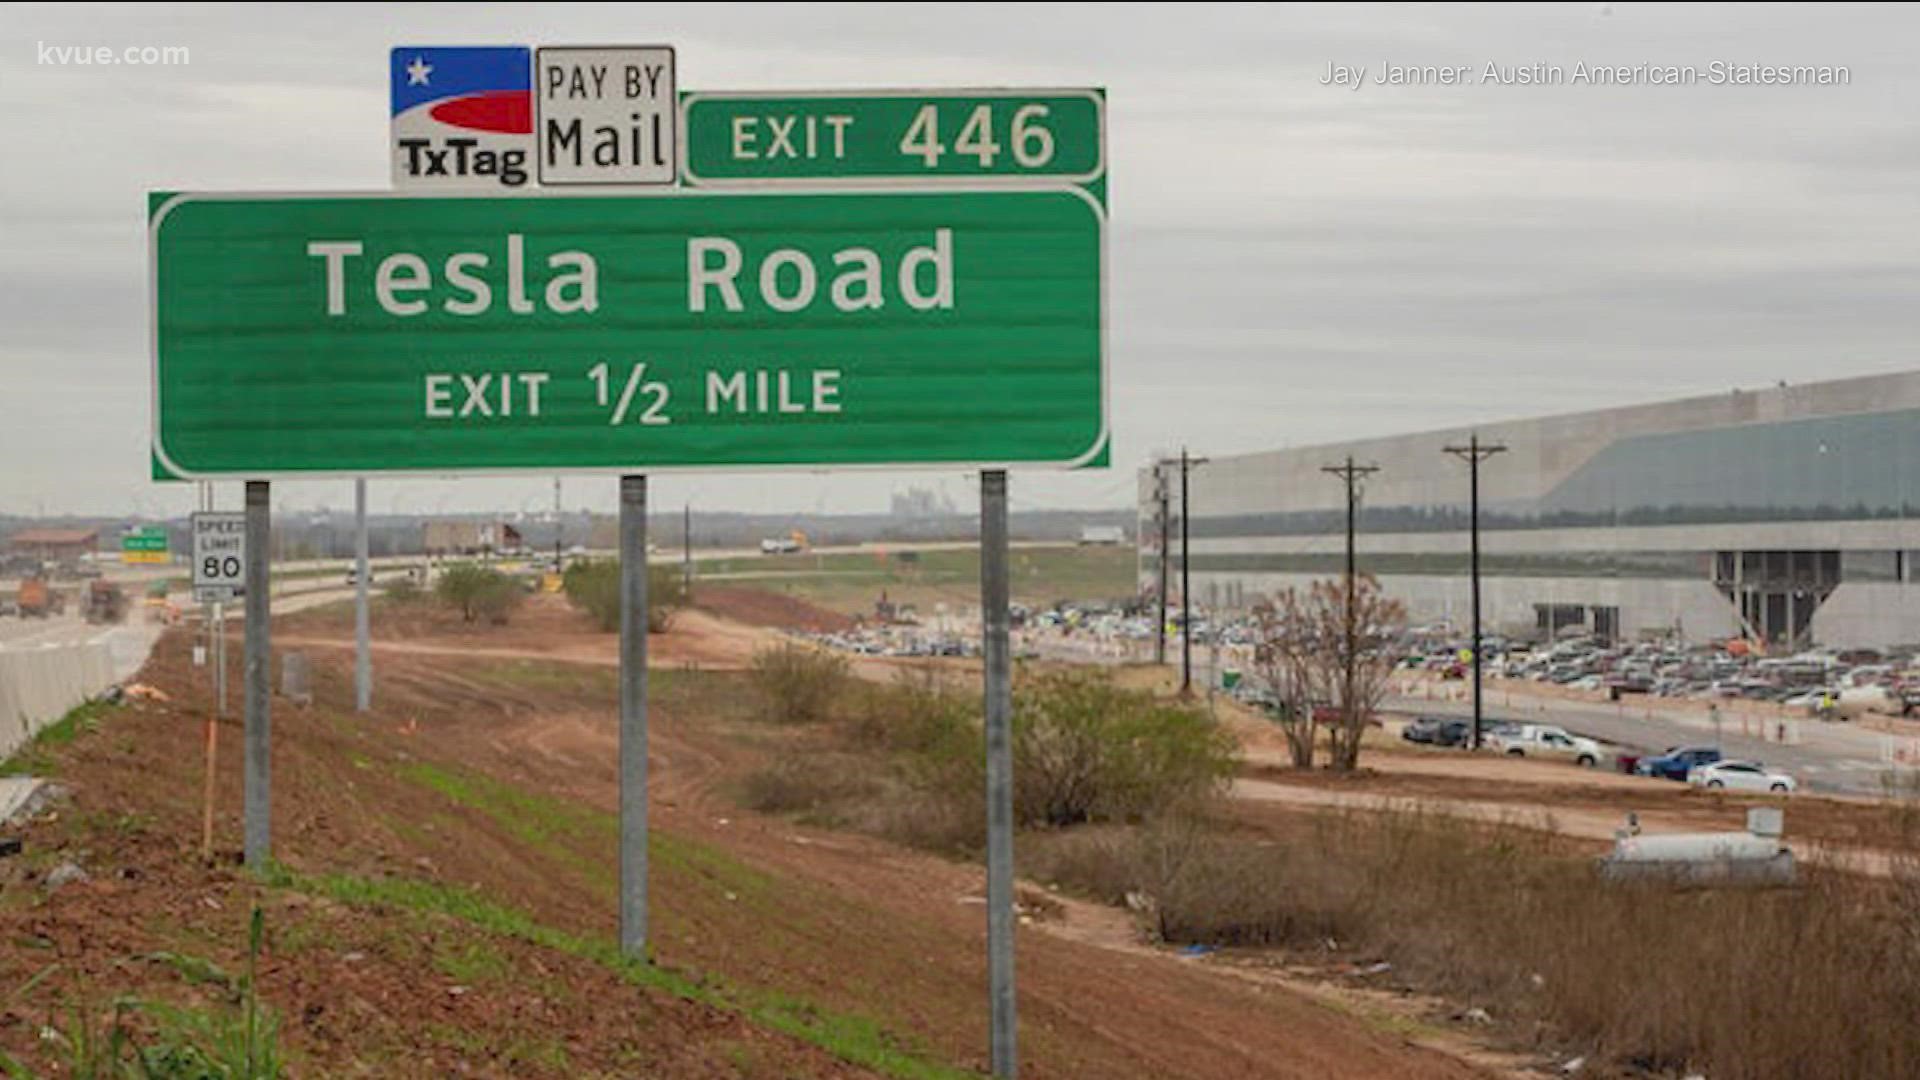 Exit 446 on Texas 130 takes you onto "Telsa Road," which is still named Harold Green Road.